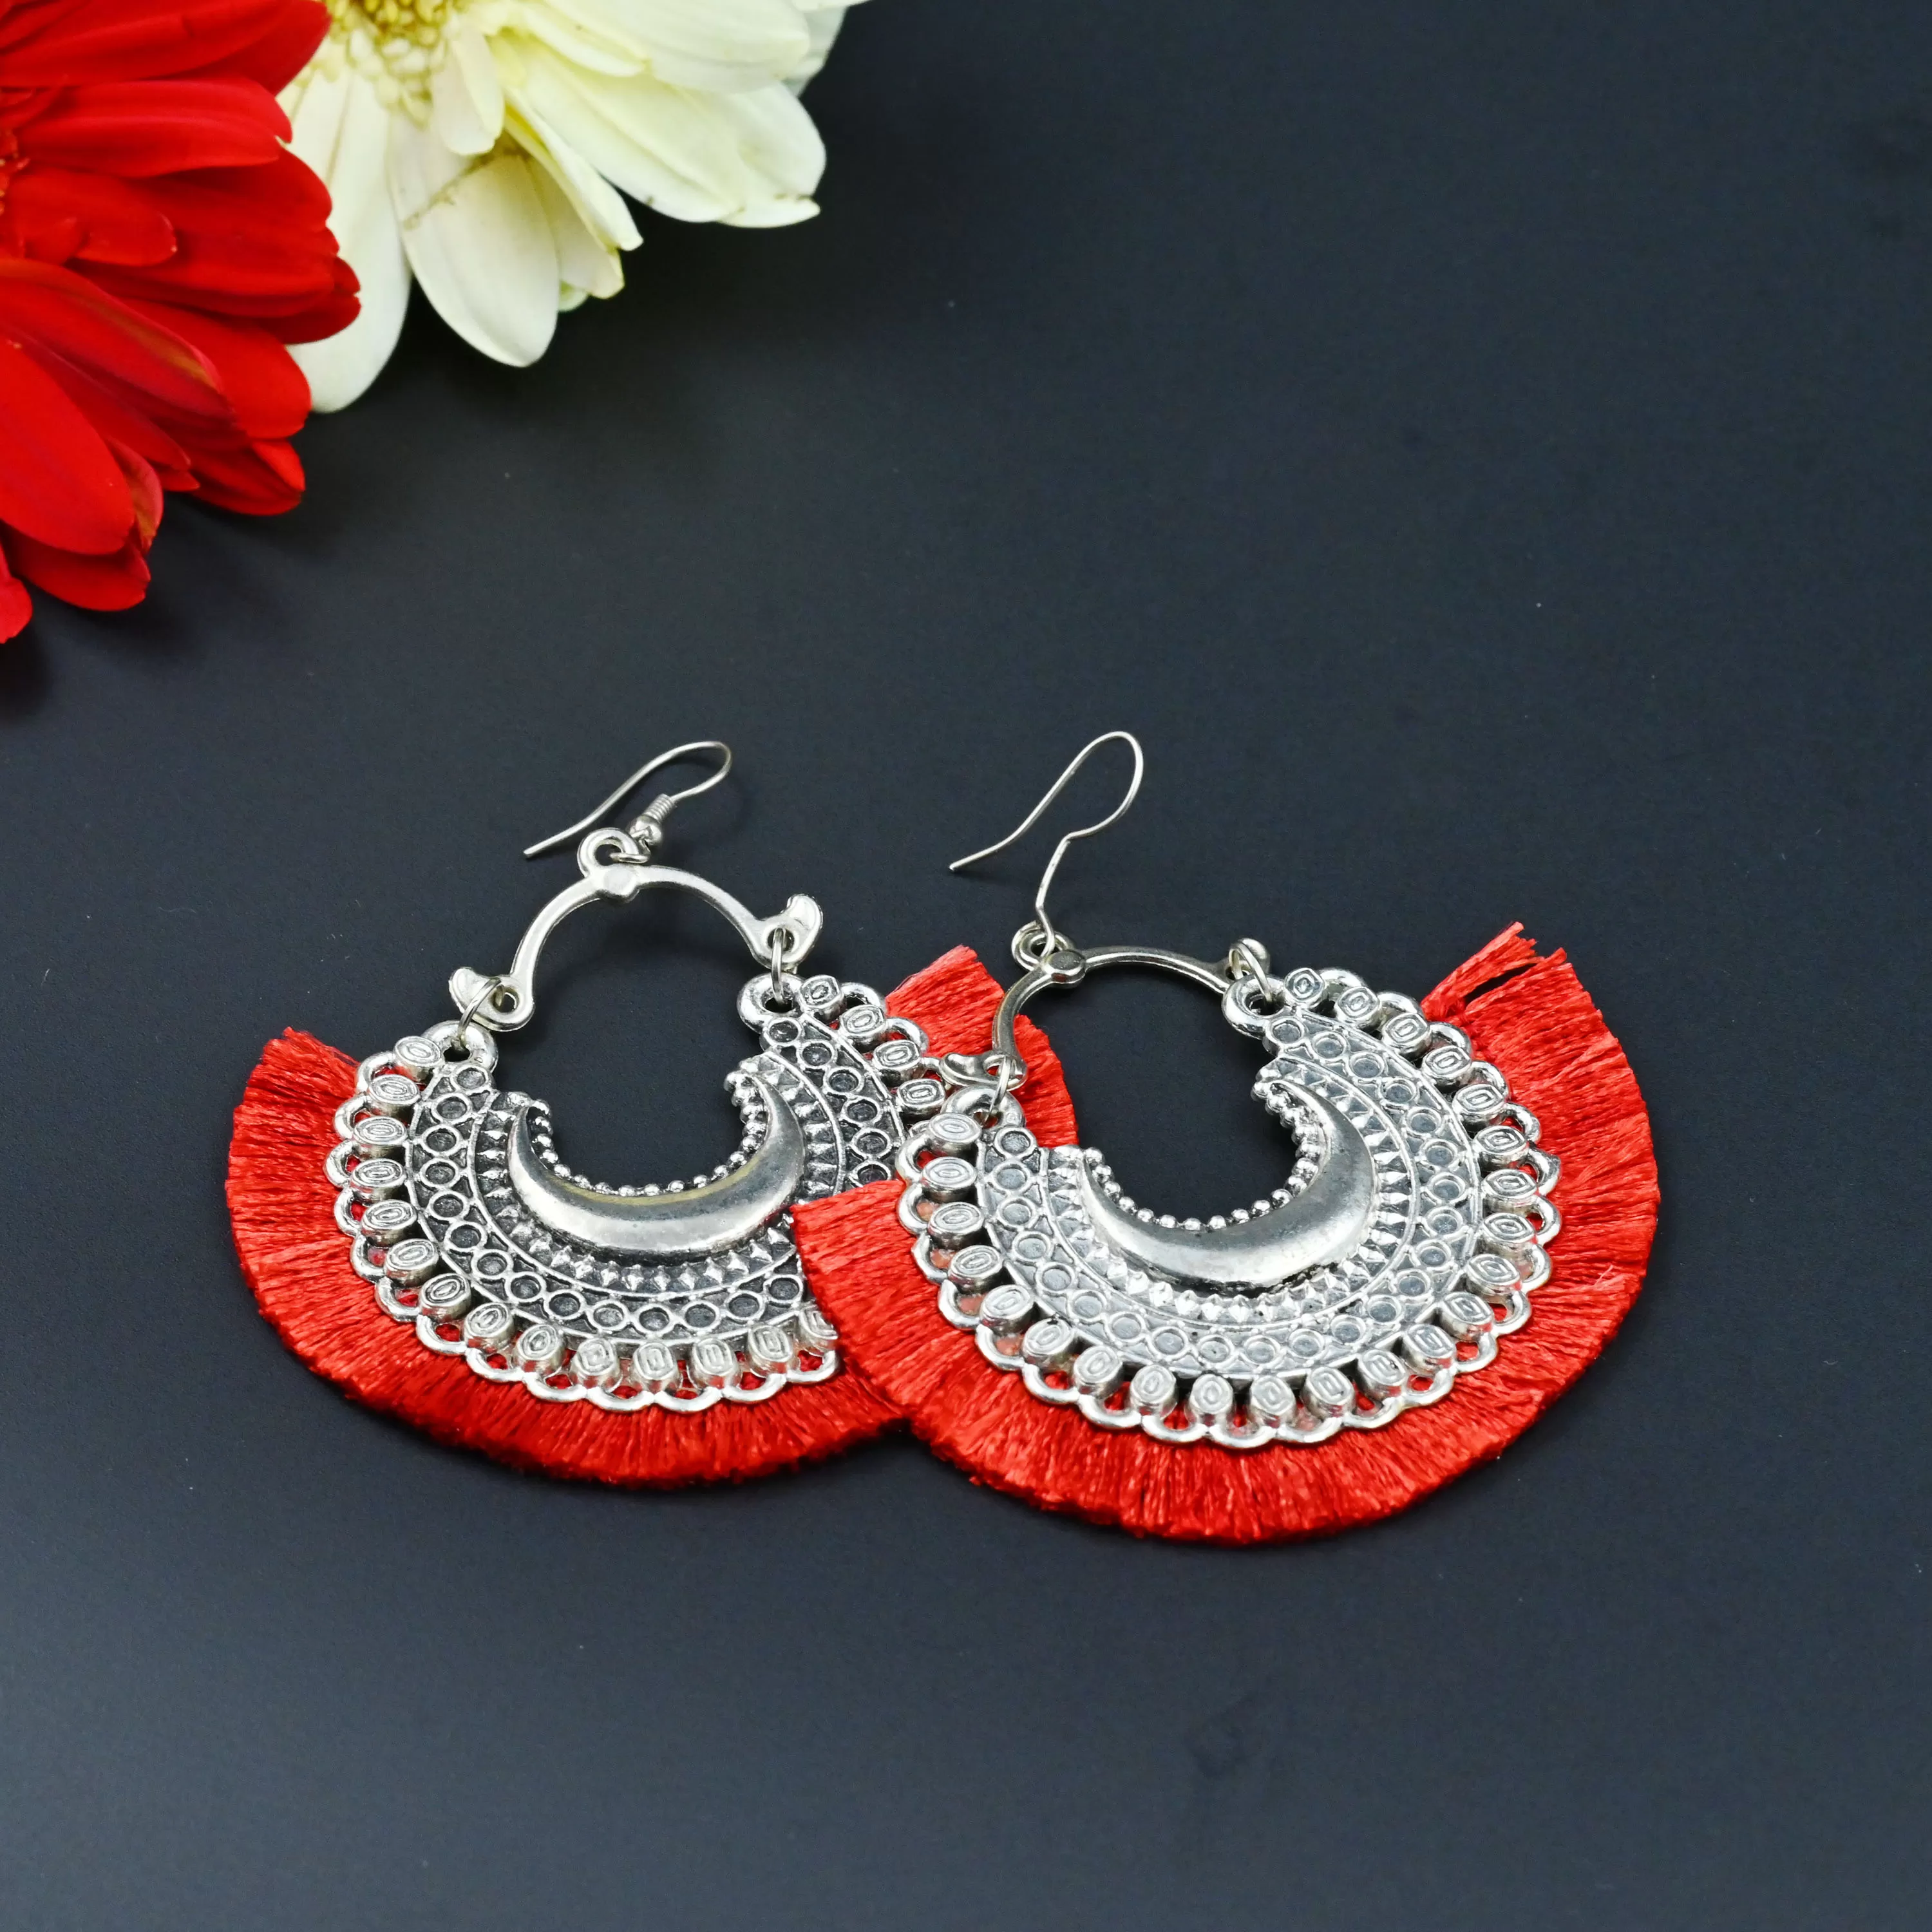 Women's Oxidized Crescent Moon Earring with Red Thread Party Wear., 2 image